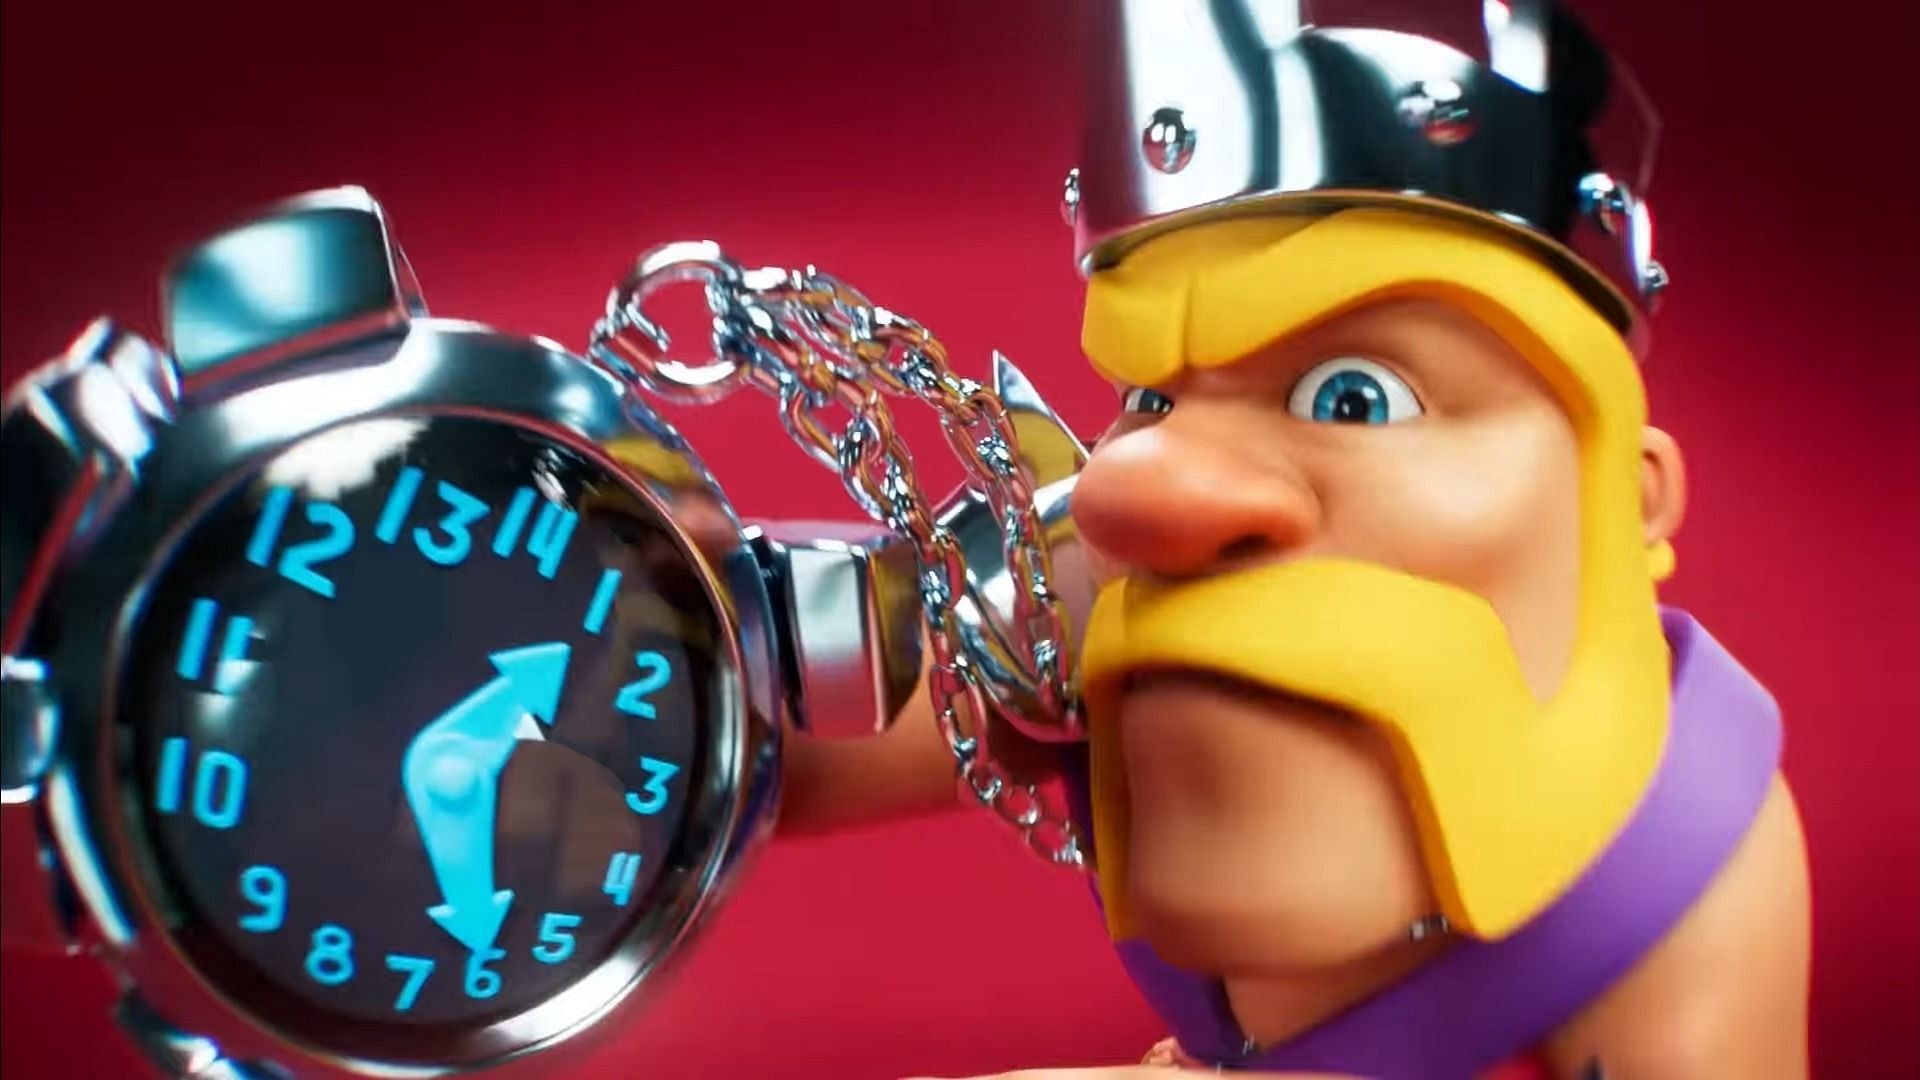 Clash of Clans Hammer Jam event trailer&#039;s clip (Image via Supercell)